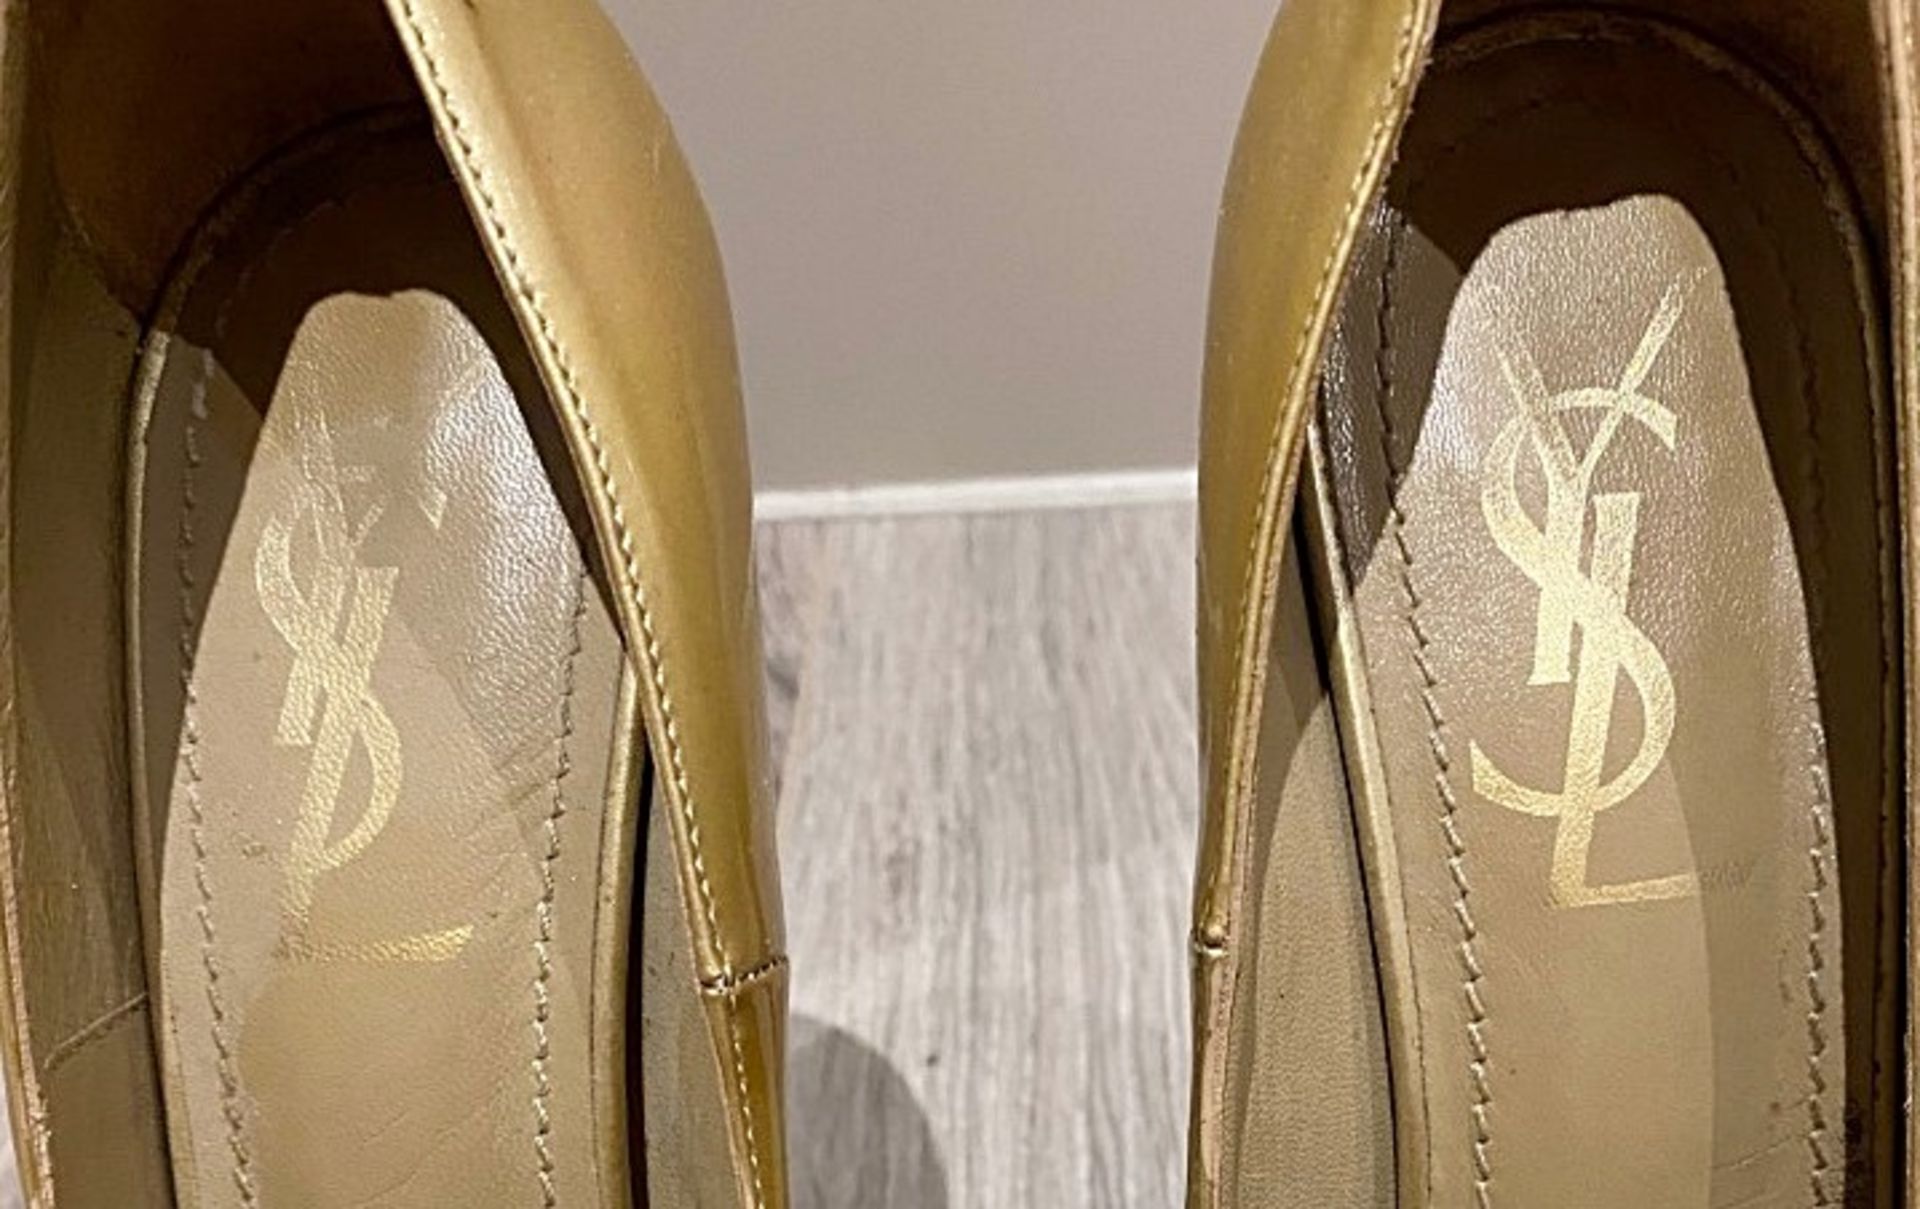 1 x Pair Of Genuine YSL High Heel Shoes In Gold - Size: 36 - Preowned in Worn Condition - Ref: LOT52 - Image 2 of 4